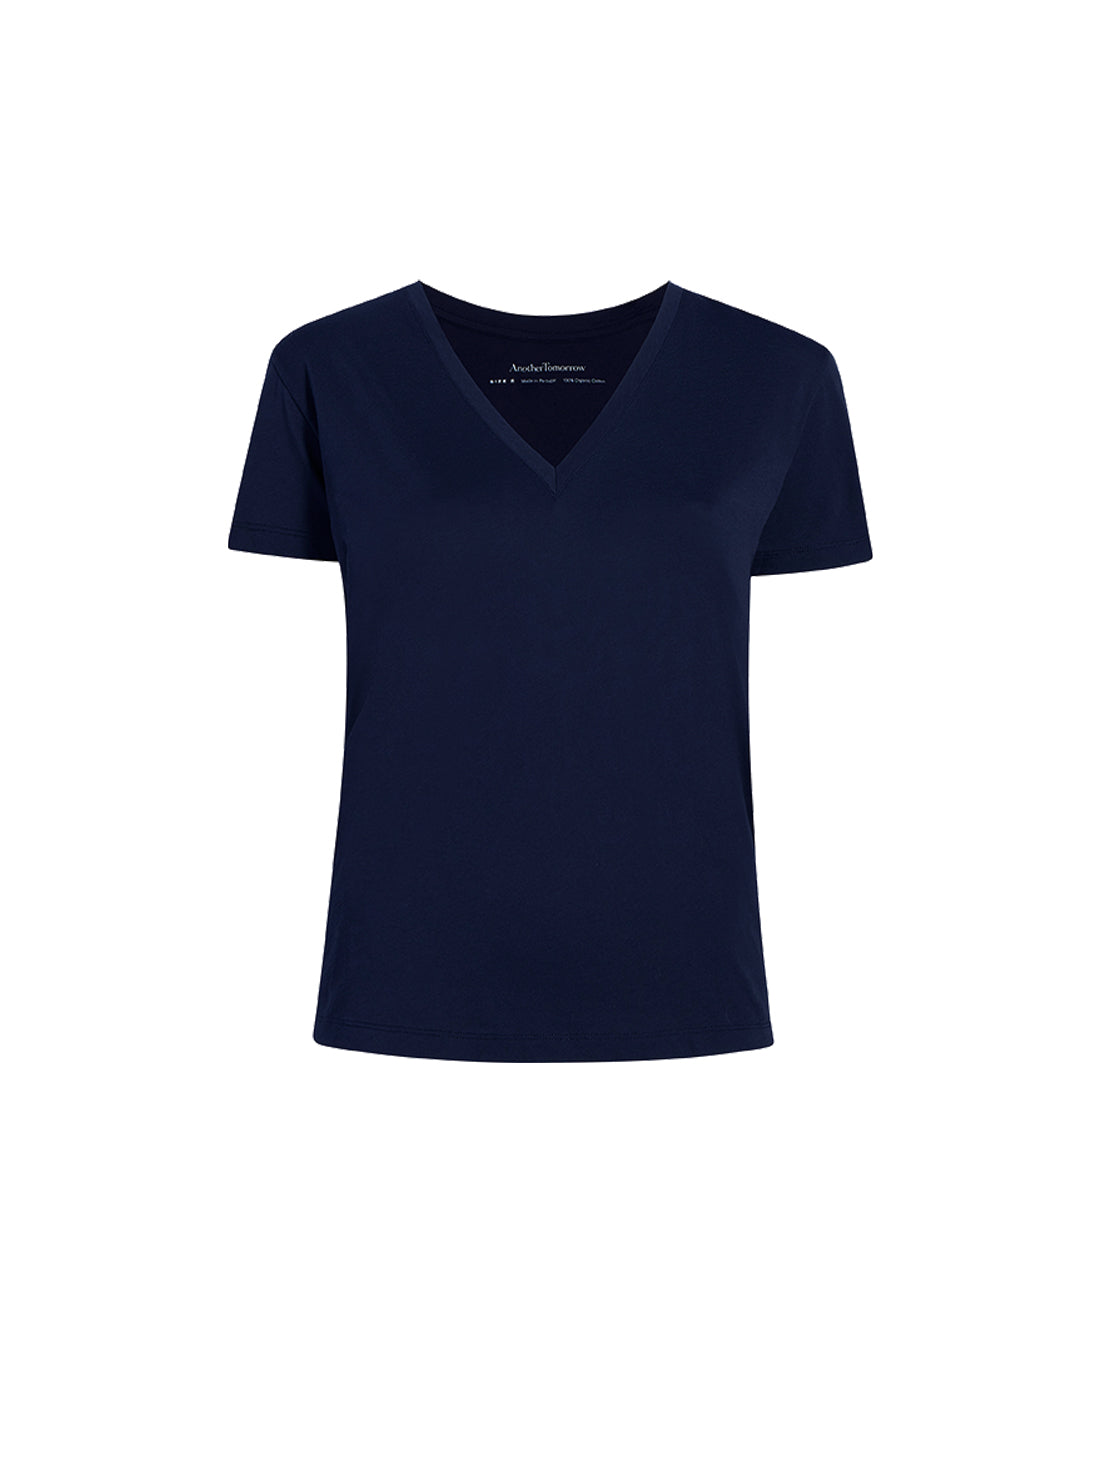 Product image19 with color navy